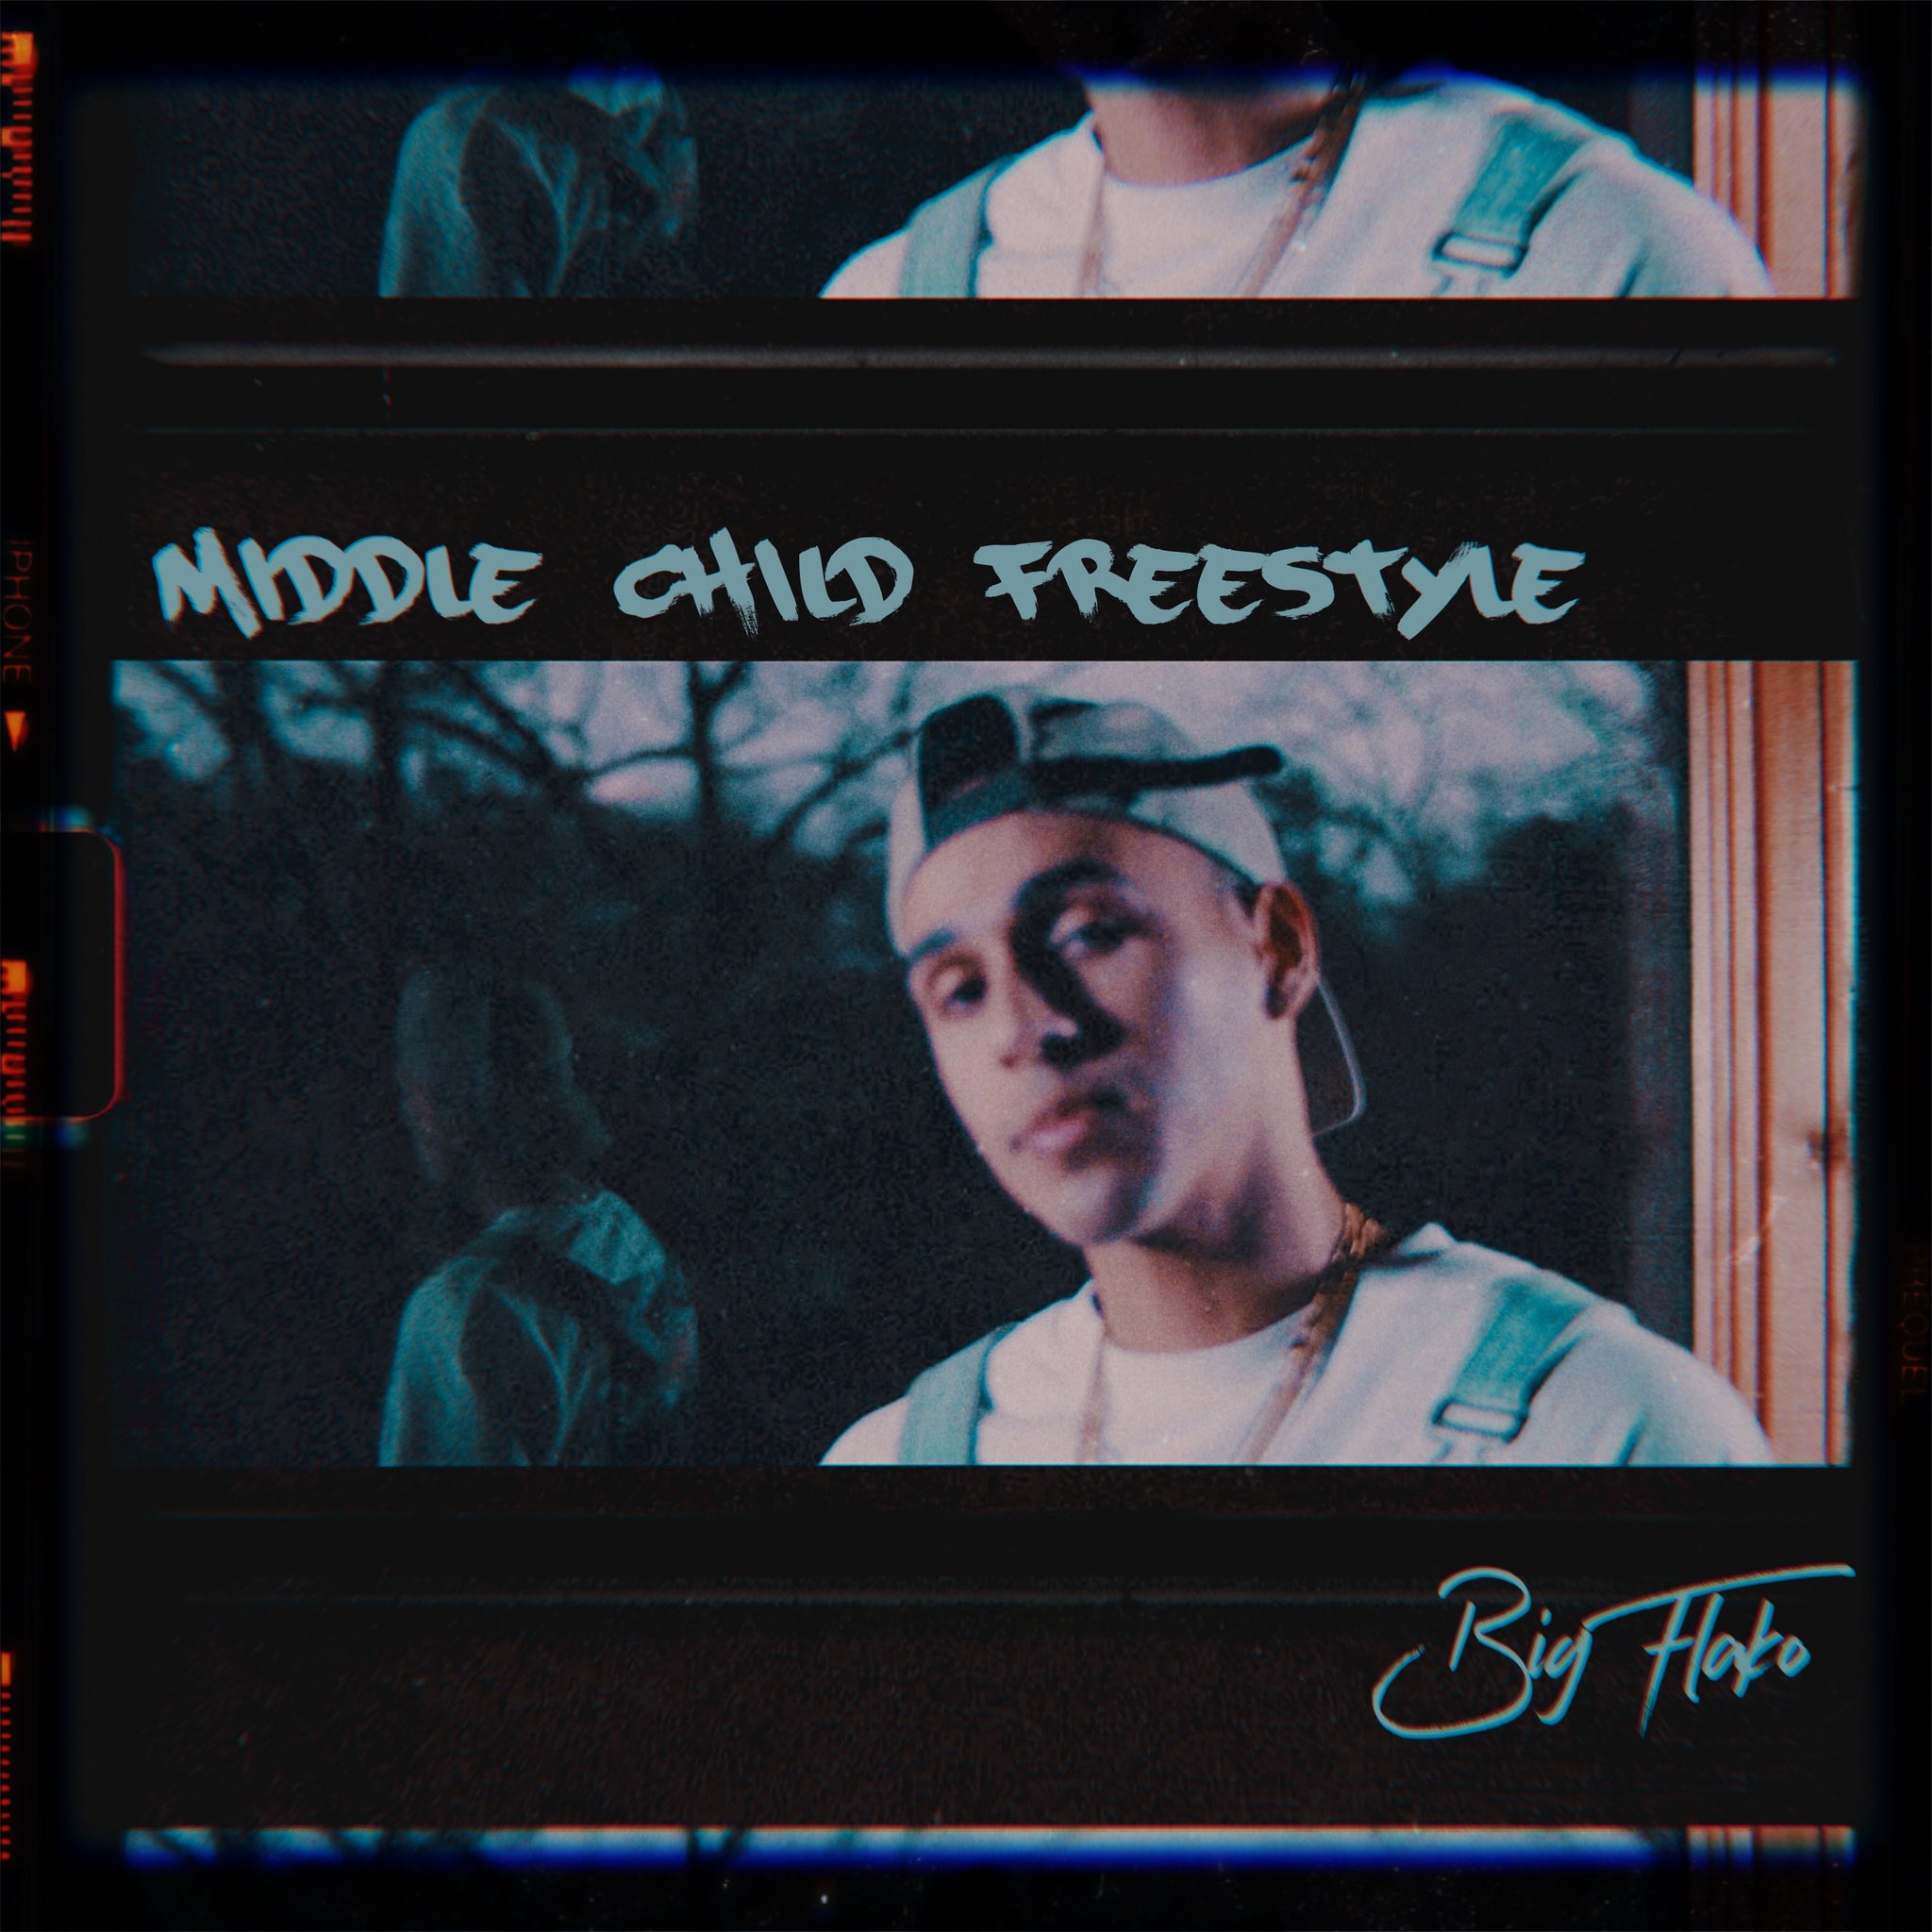 Middle Child Freestyle by Big Flako